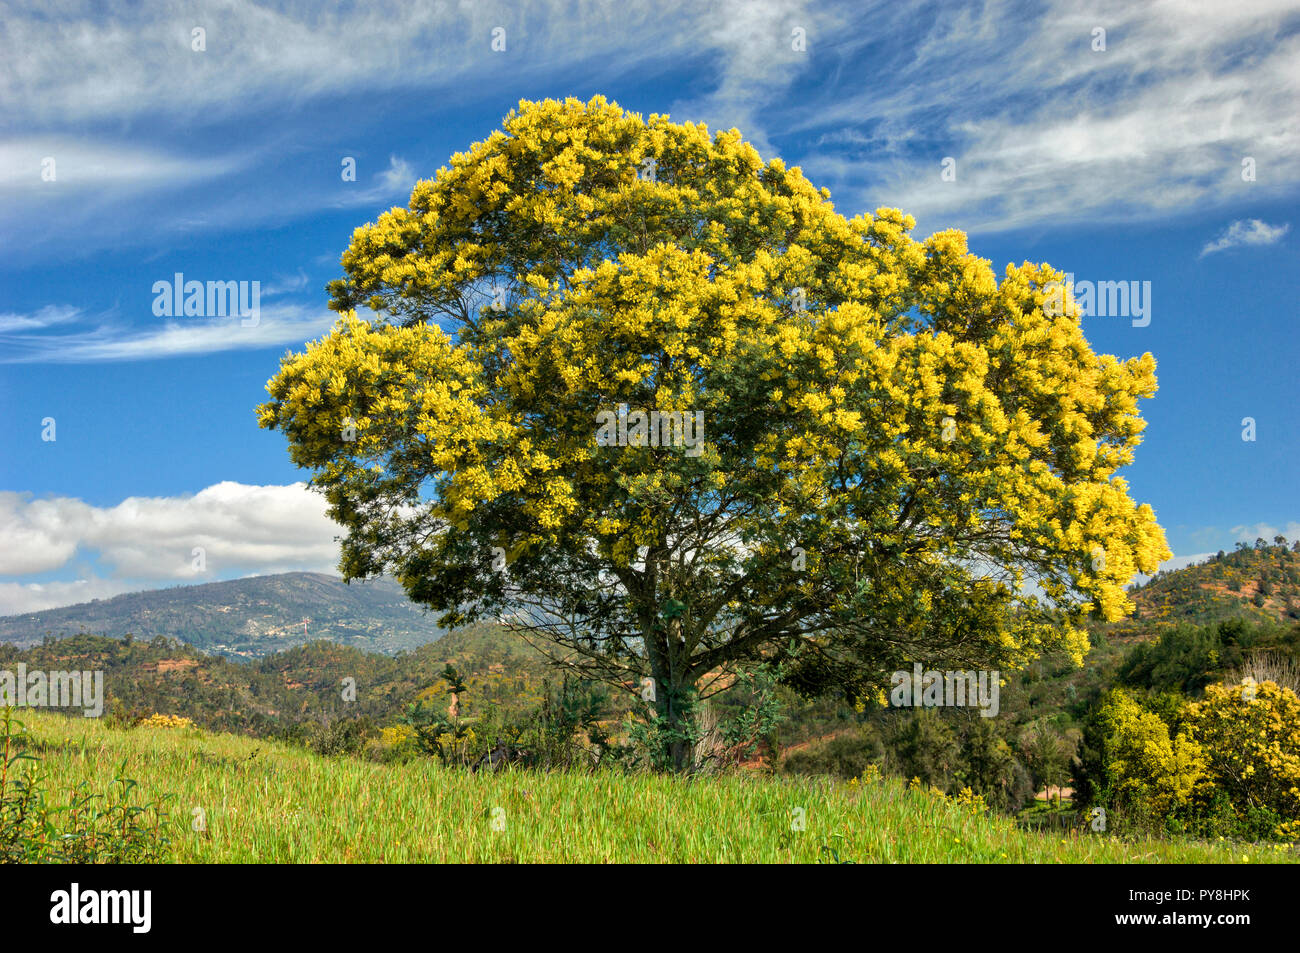 A mimosa tree in the foothills of Monchique, the Algarve, Portugal Stock Photo